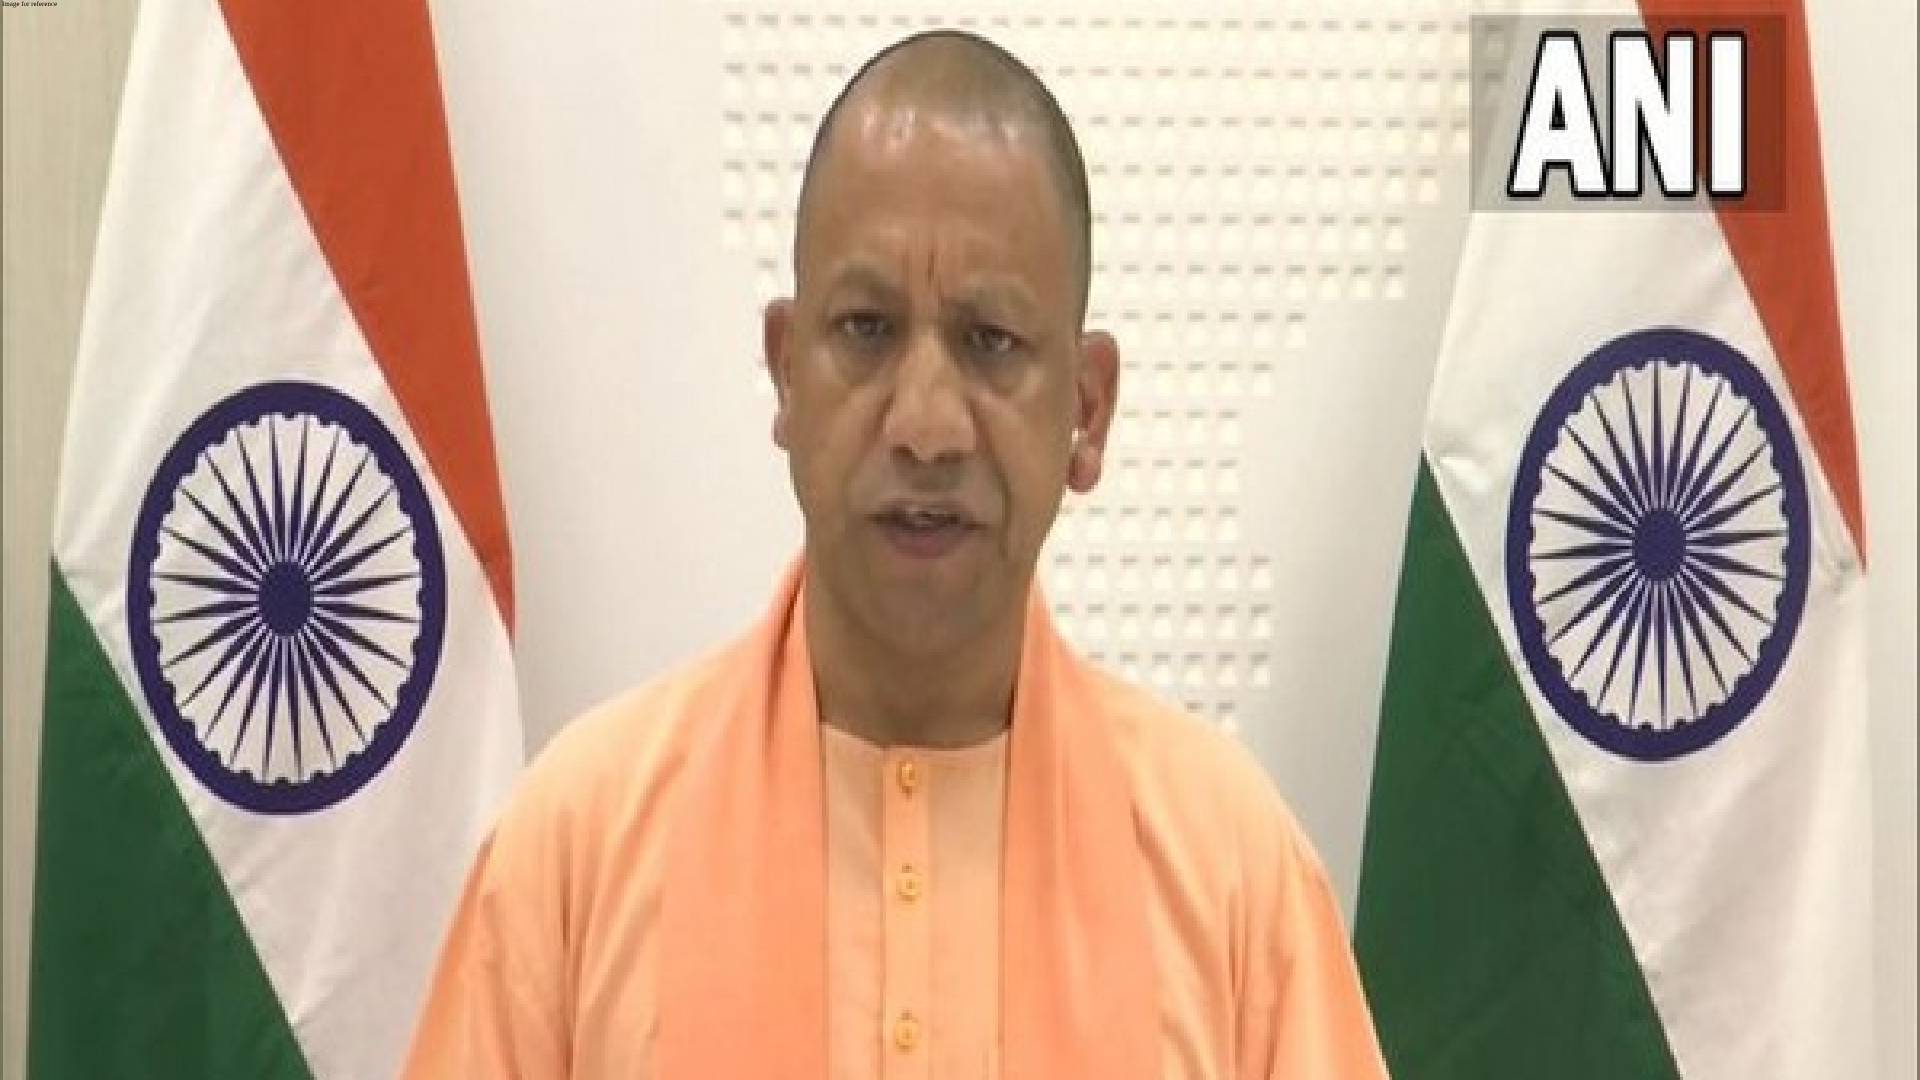 Train from Chandigarh to Dibrugarh derails in Gonda, CM Yogi directs officials to expedite relief work